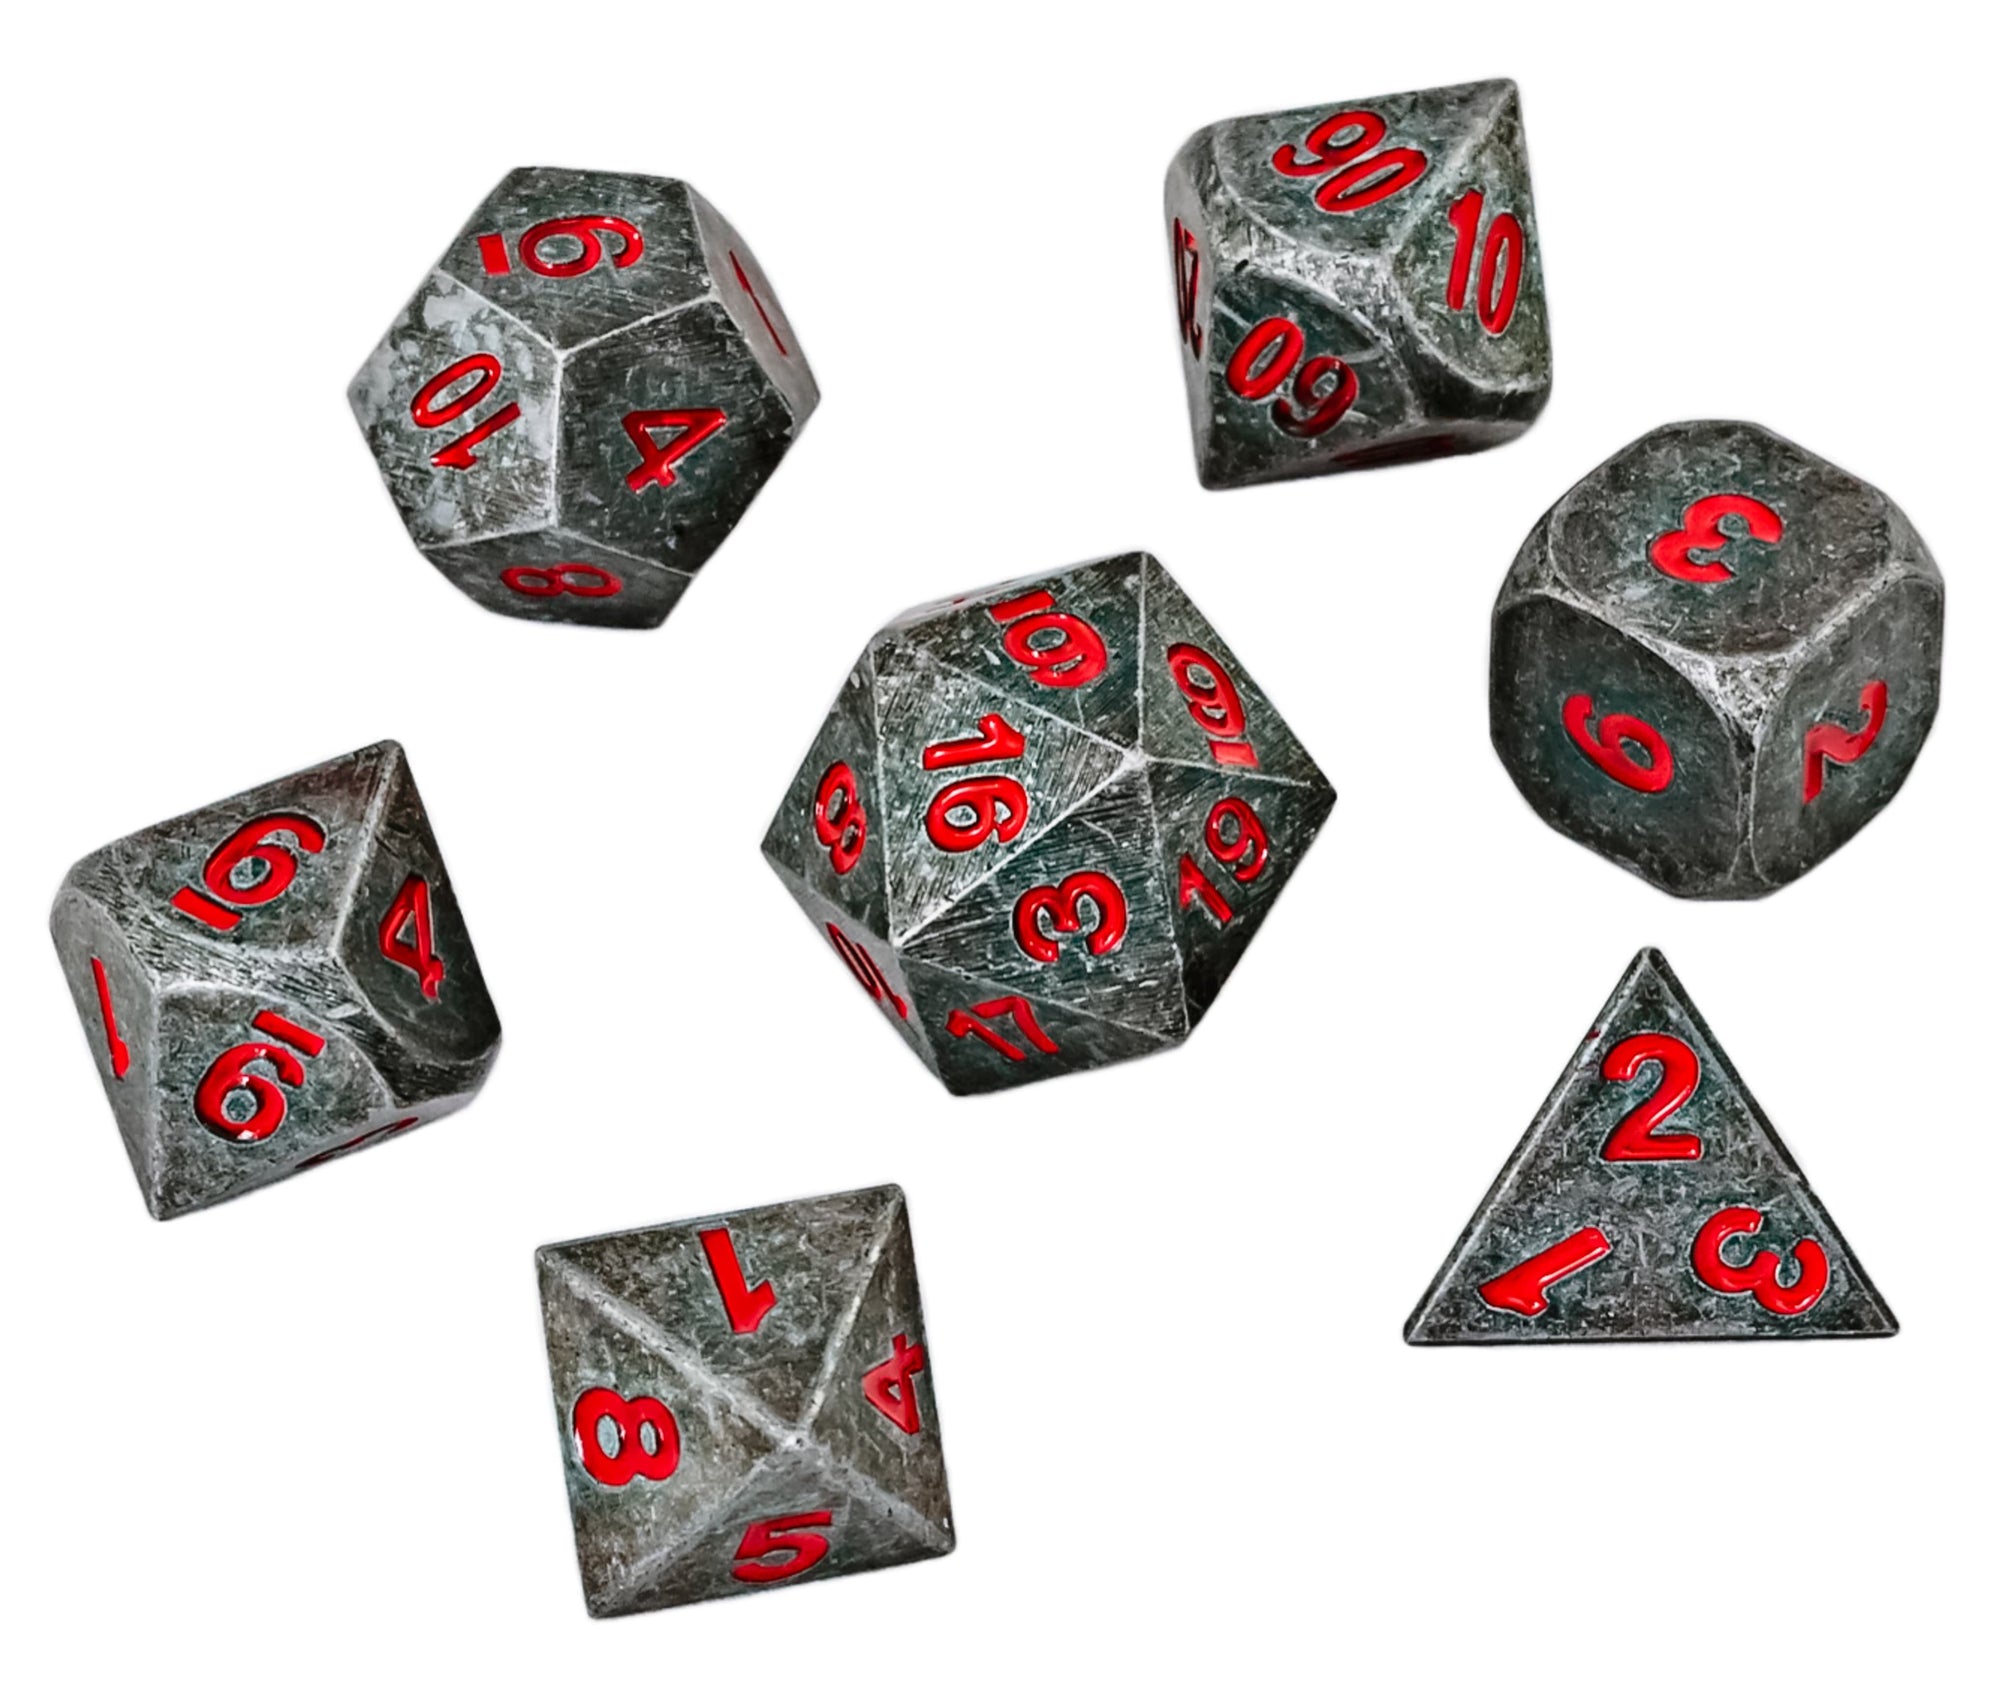 Chaos Red - 7 PC Set